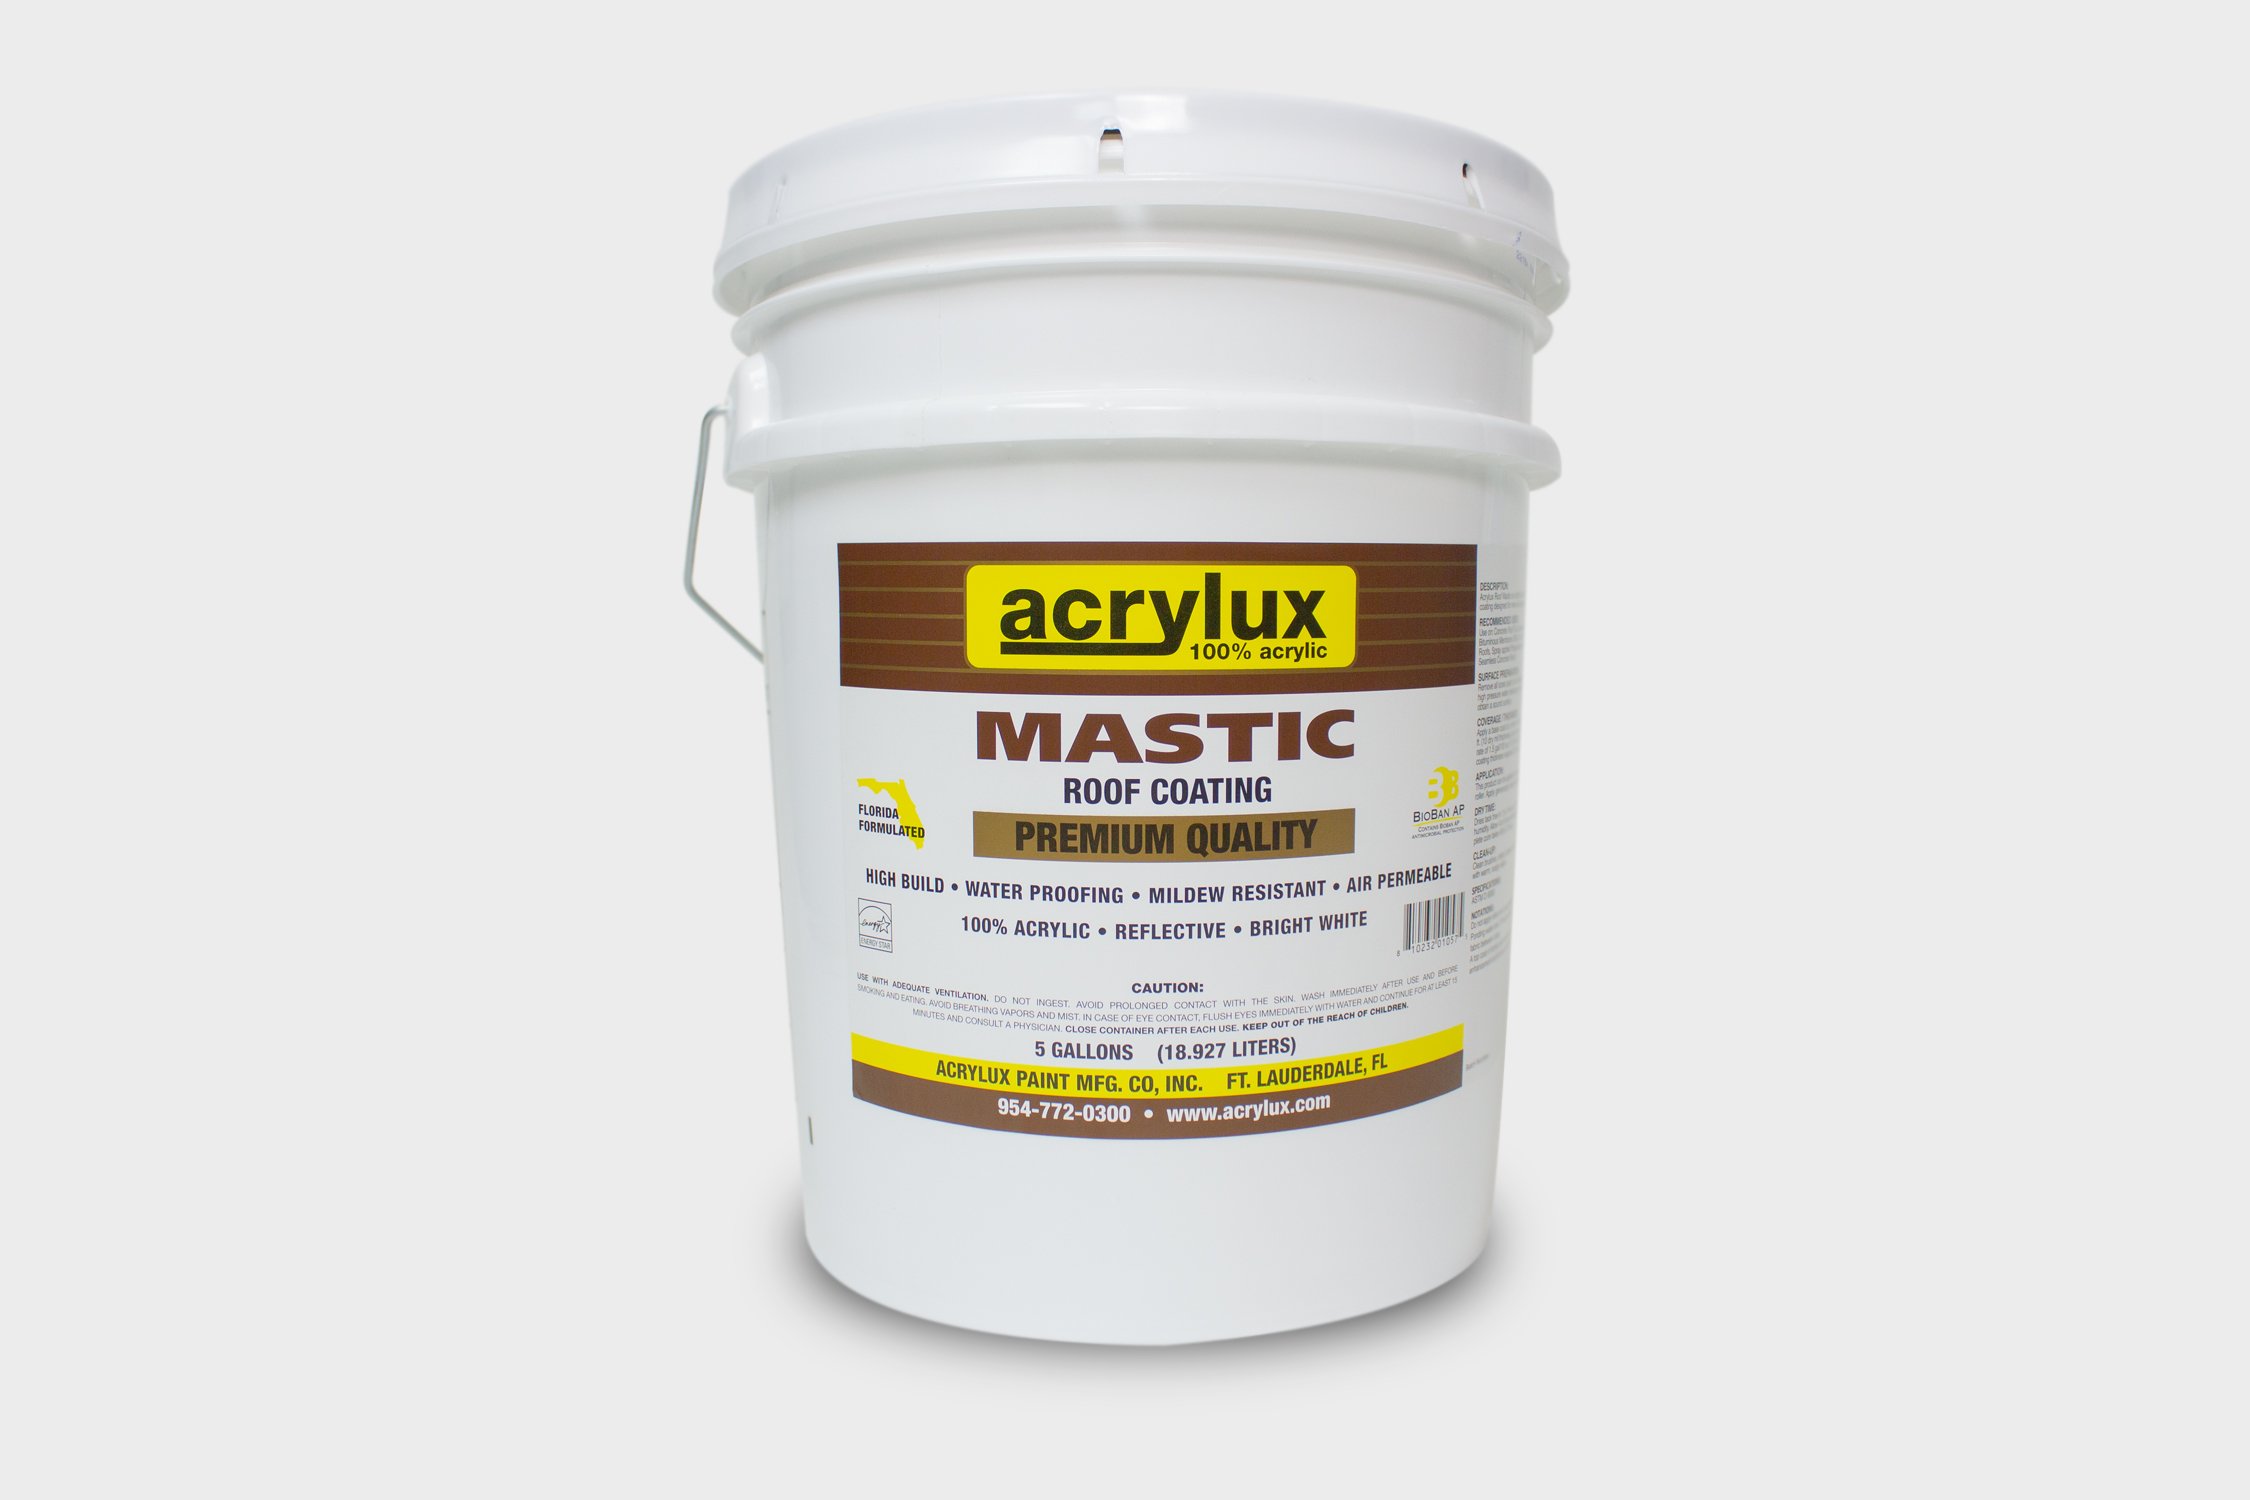 Acrylux Quality Waterproofing Paints and Coatings - South Florida